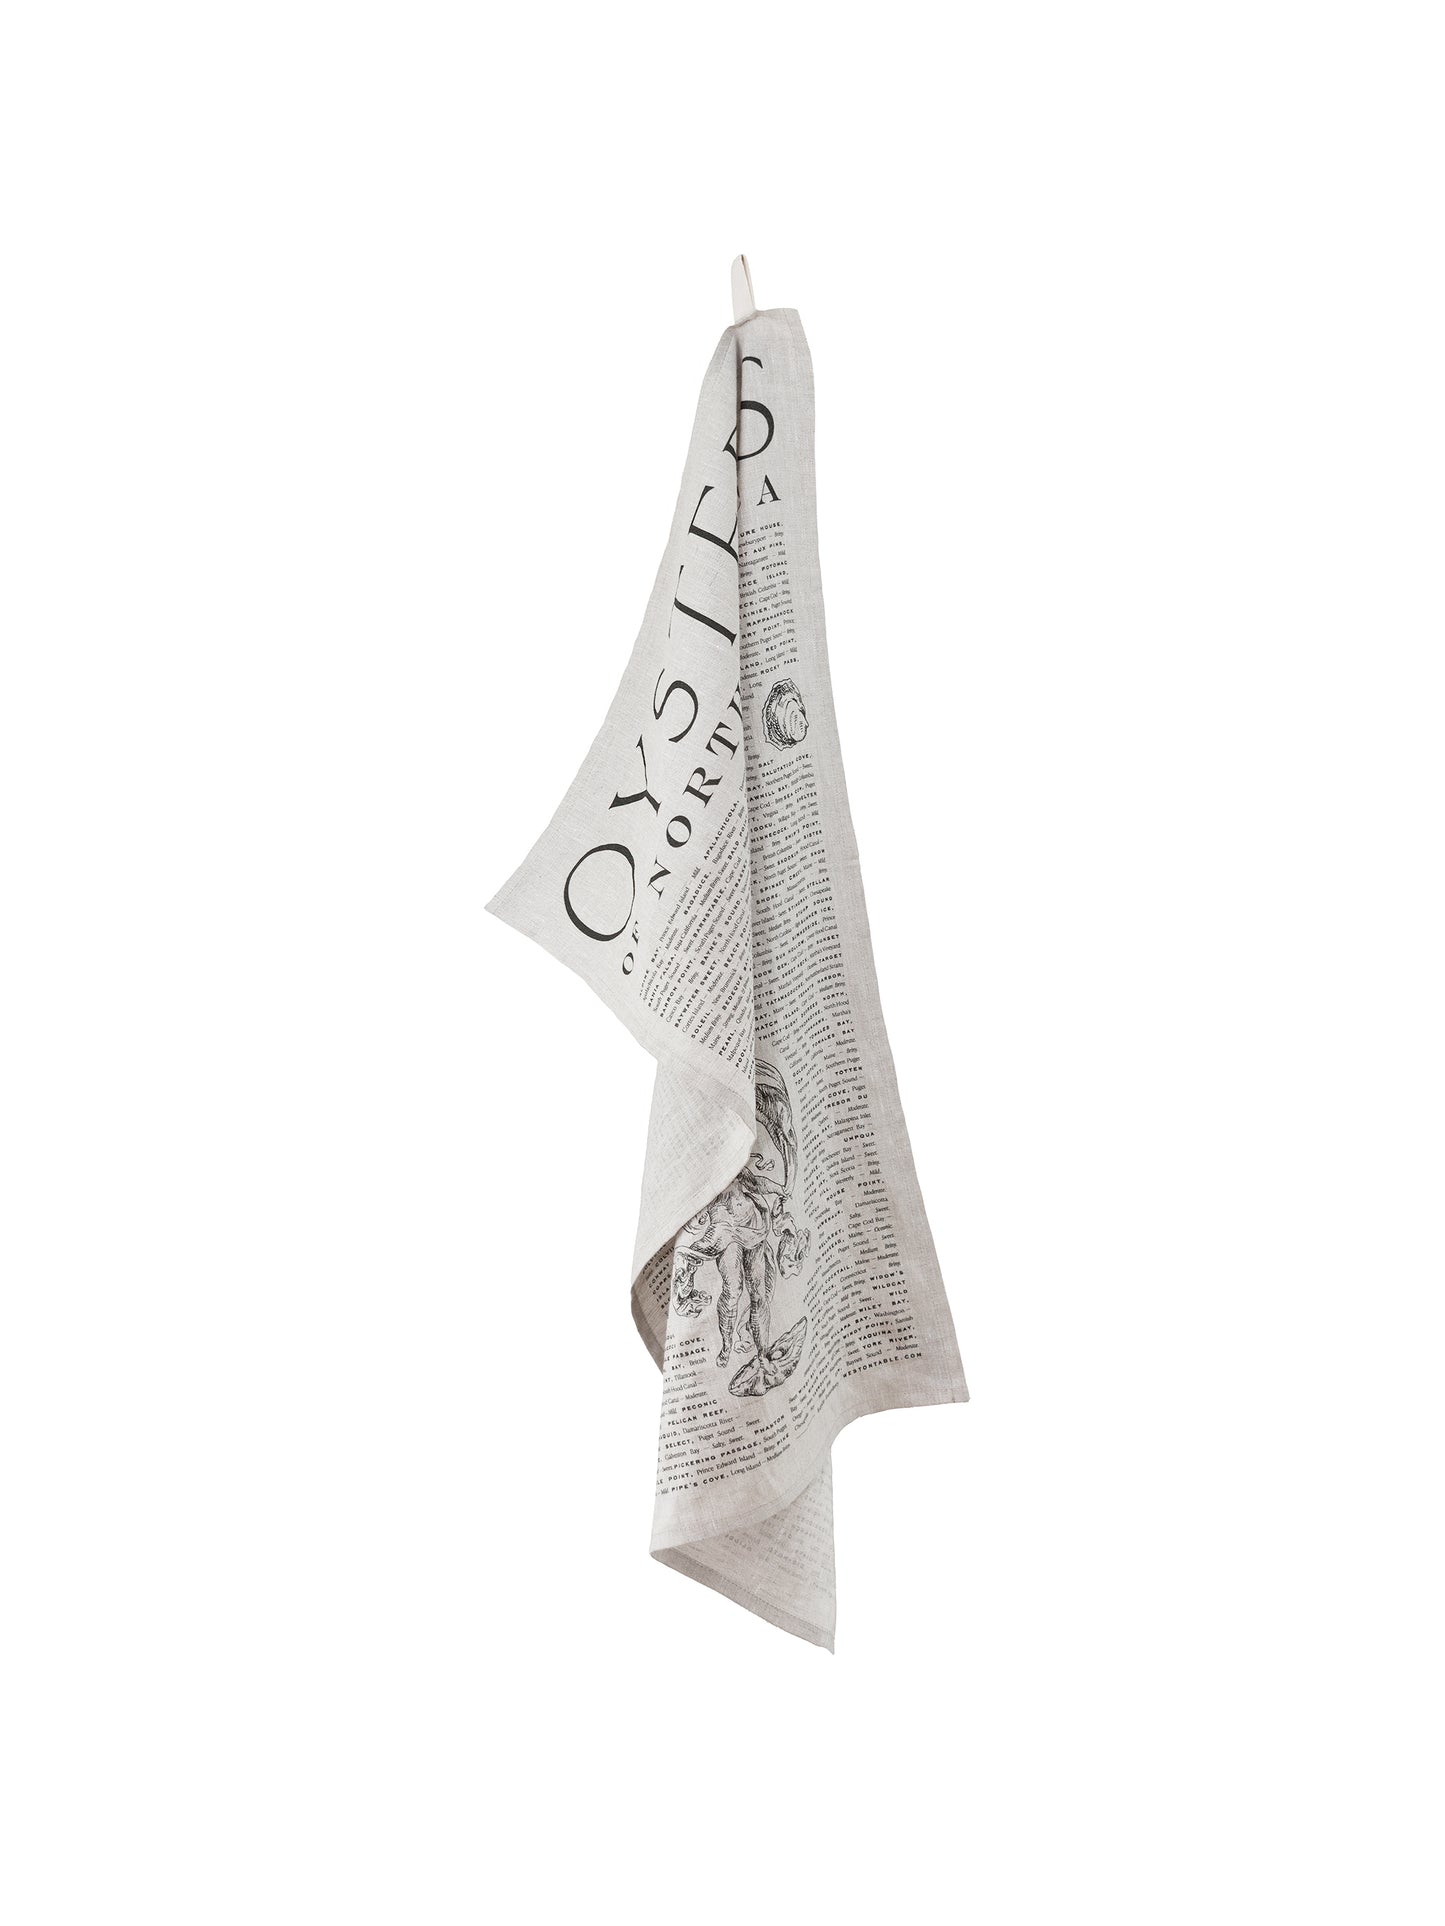 Oysters of North America Linen Kitchen Towel Weston Table